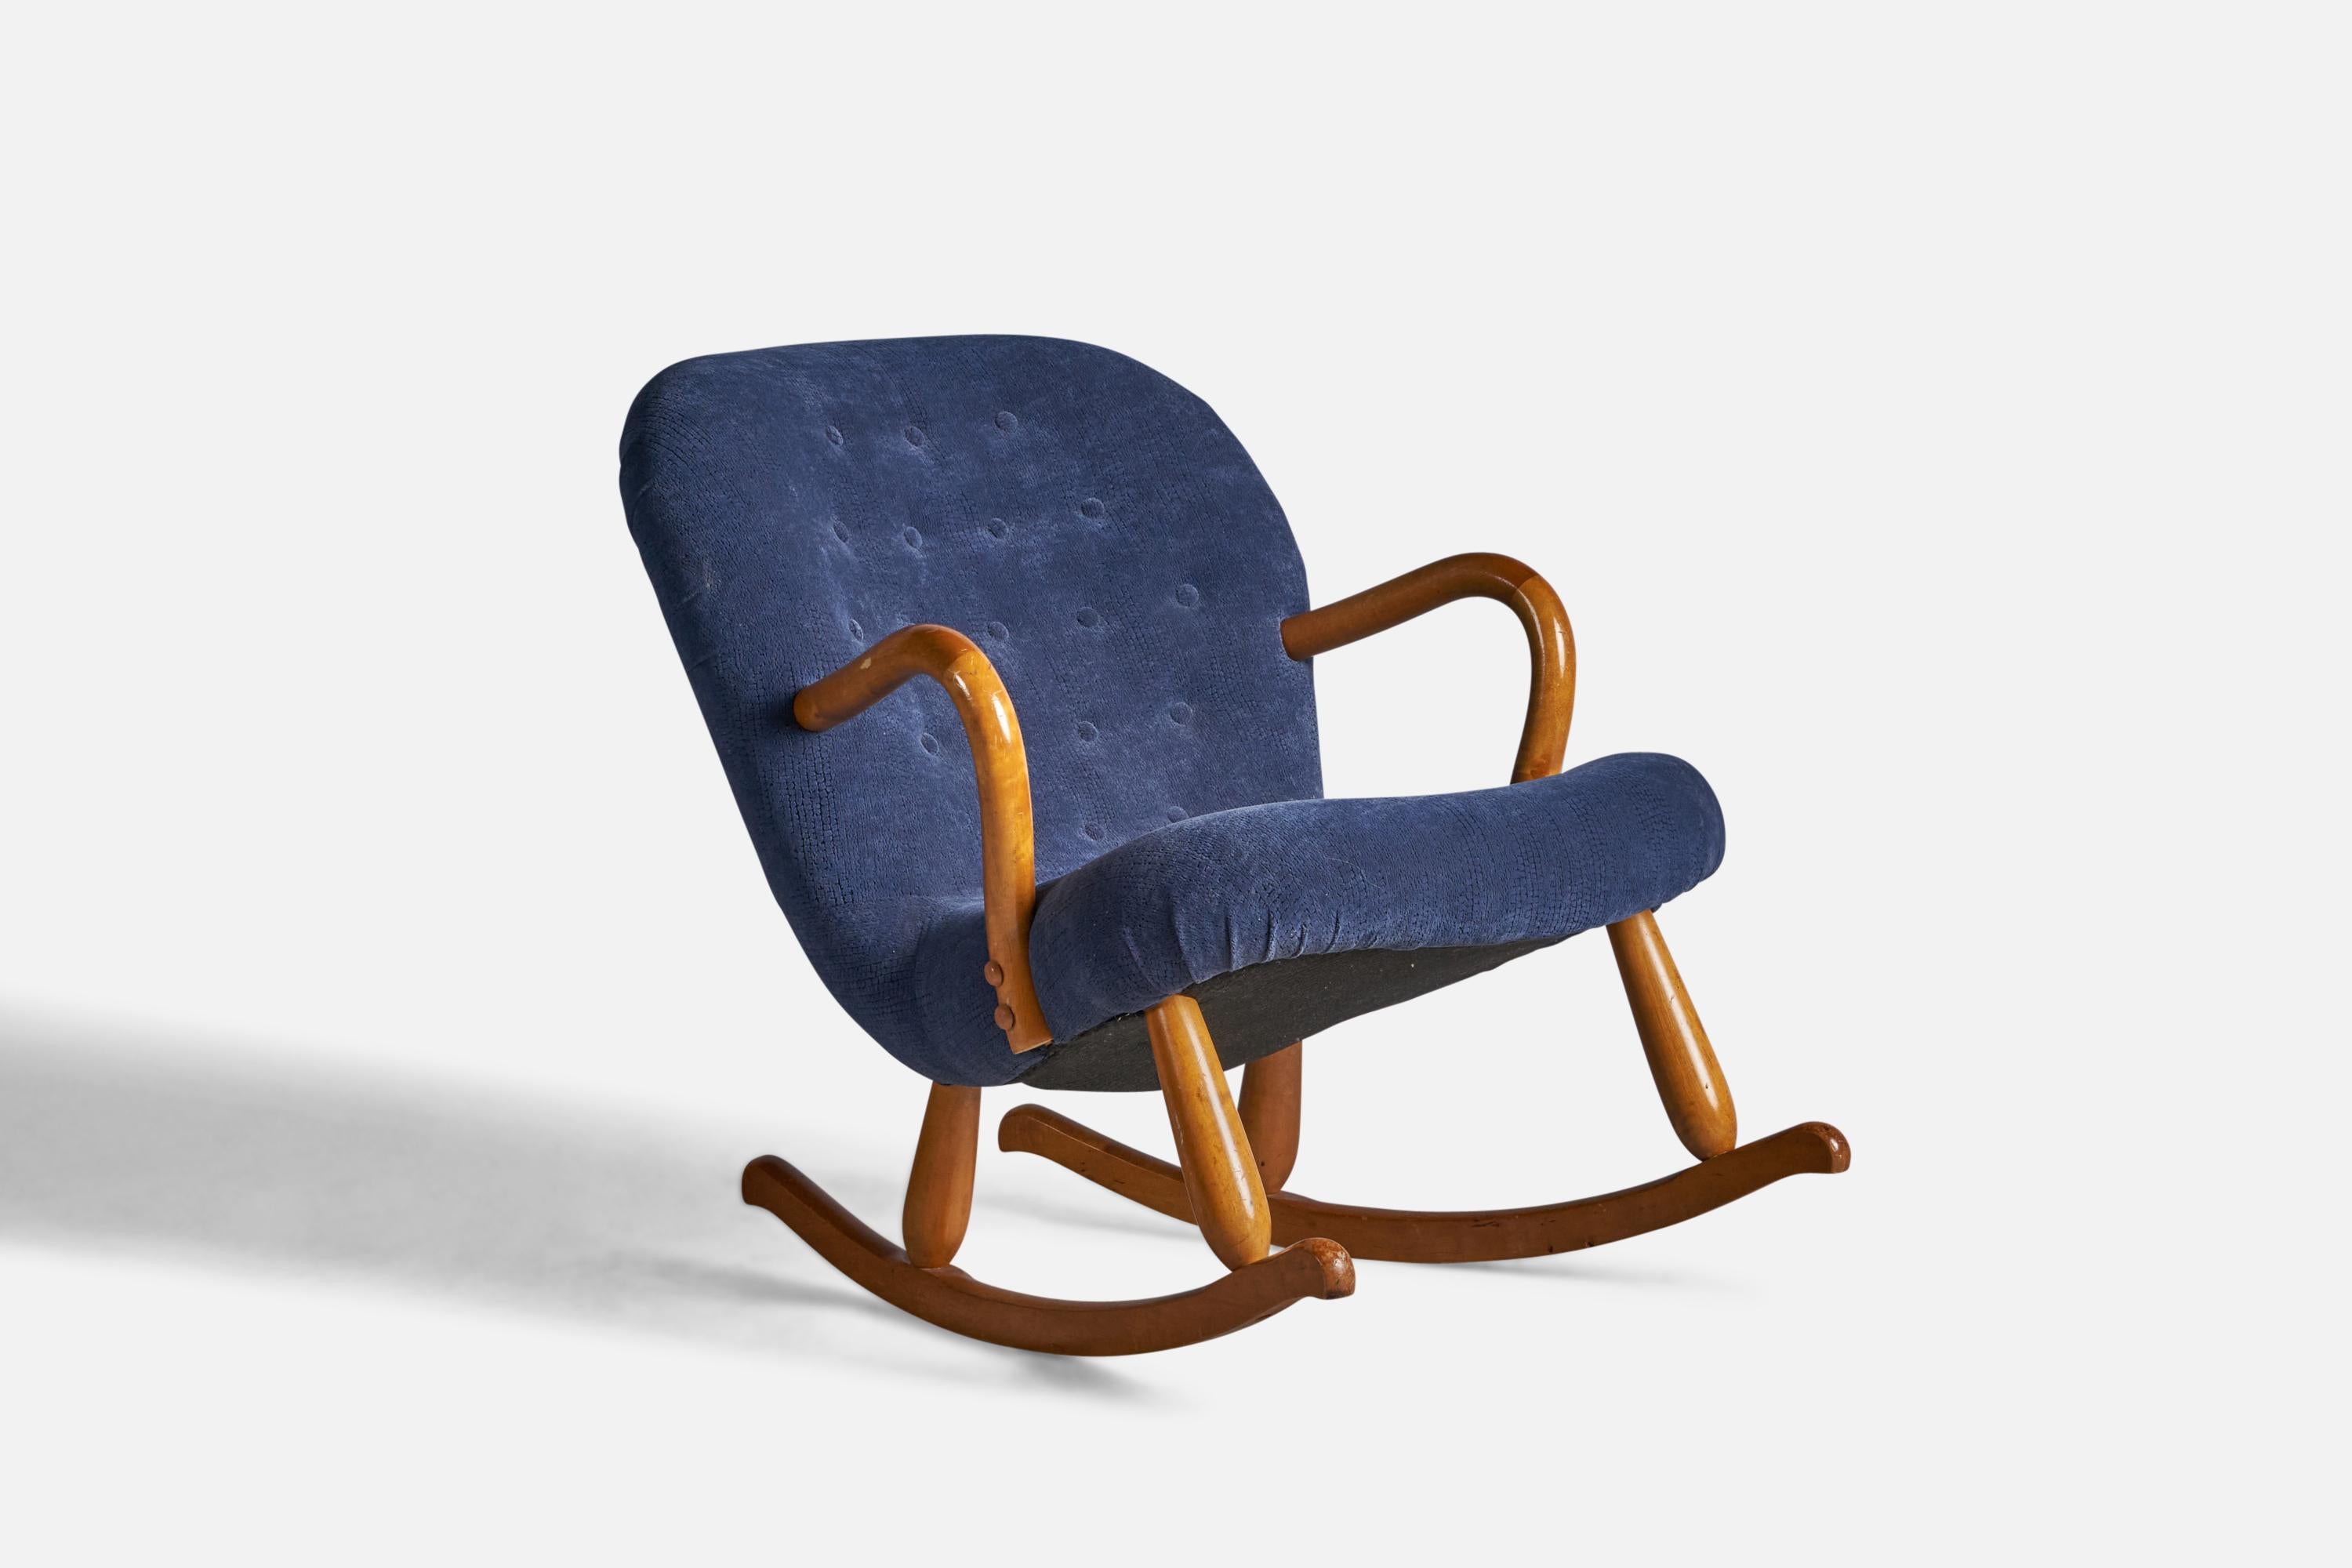 A birch and blue fabric rocking lounge chair attrubuted to Arnold Madsen, Denmark, 1950s.

18